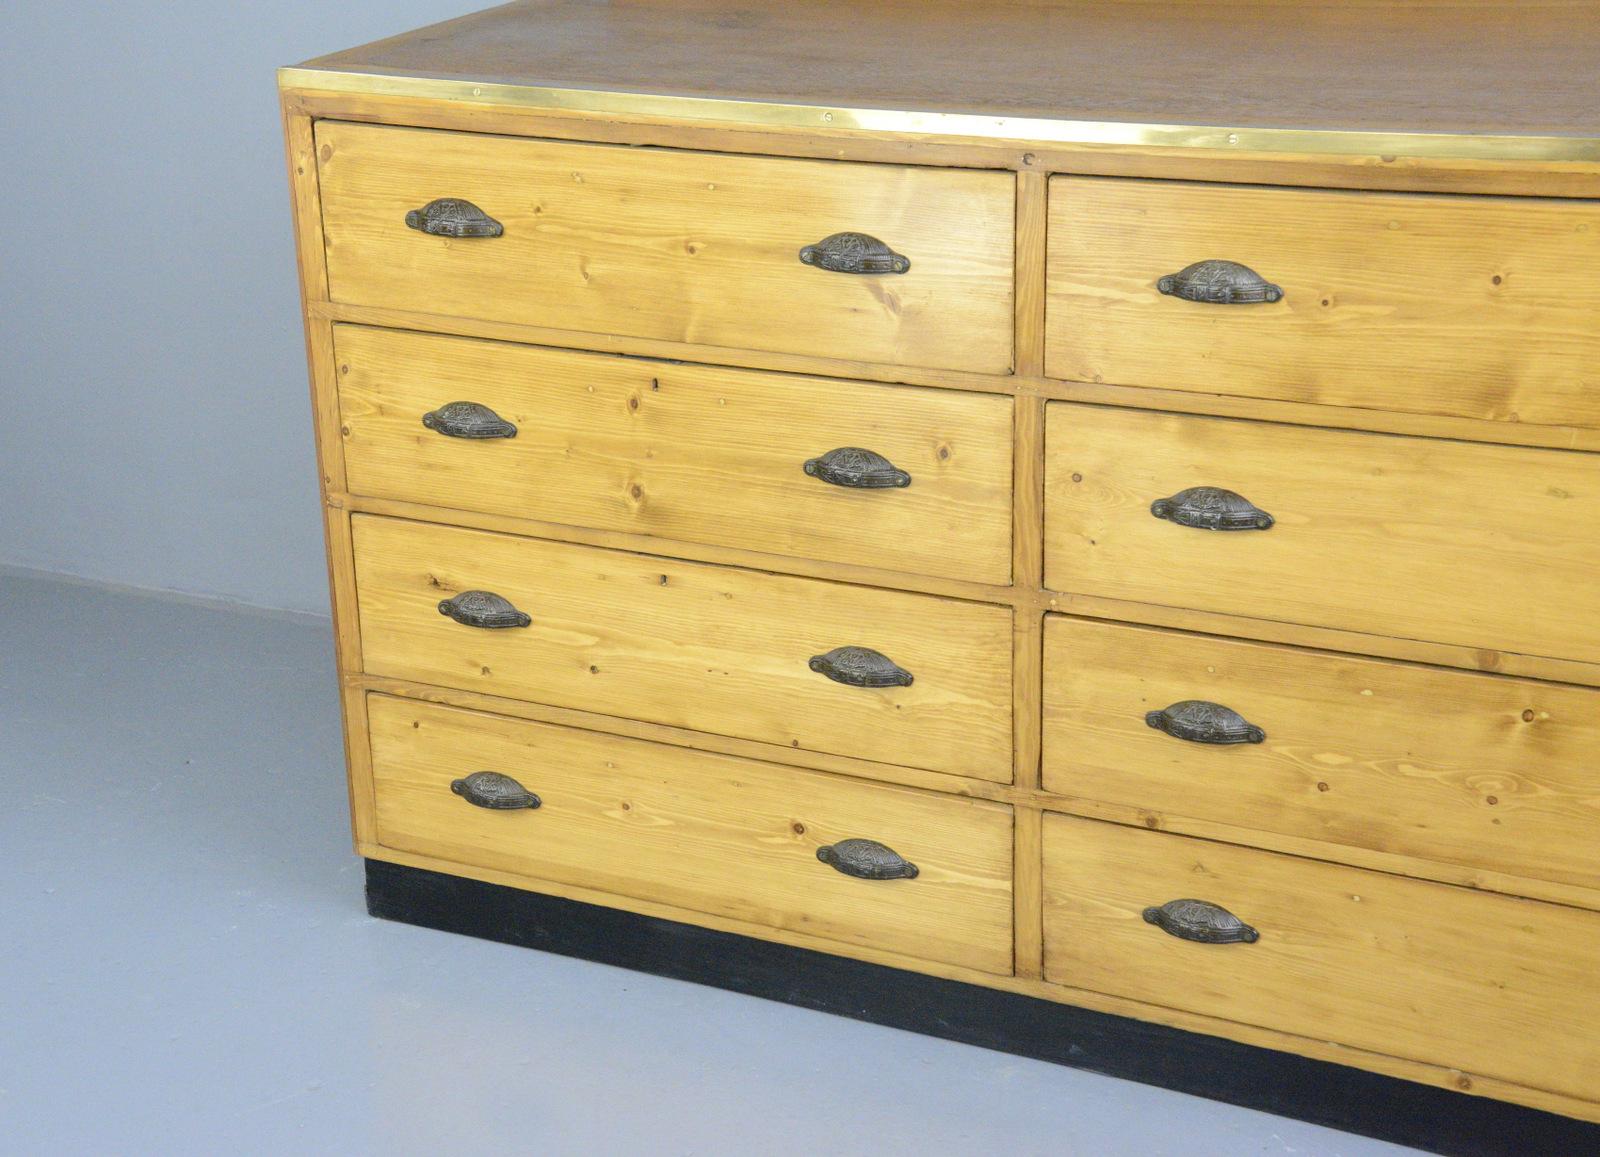 Large Dutch tailors drawers, circa 1910

- Price is per cabinet (2 available)
- Ornate cast iron handles
- Brass edging
- Solid pine drawers
- Salvaged from a tailors in central Amsterdam
- Dutch, 1910
- Measures: 171cm wide x 76cm deep x